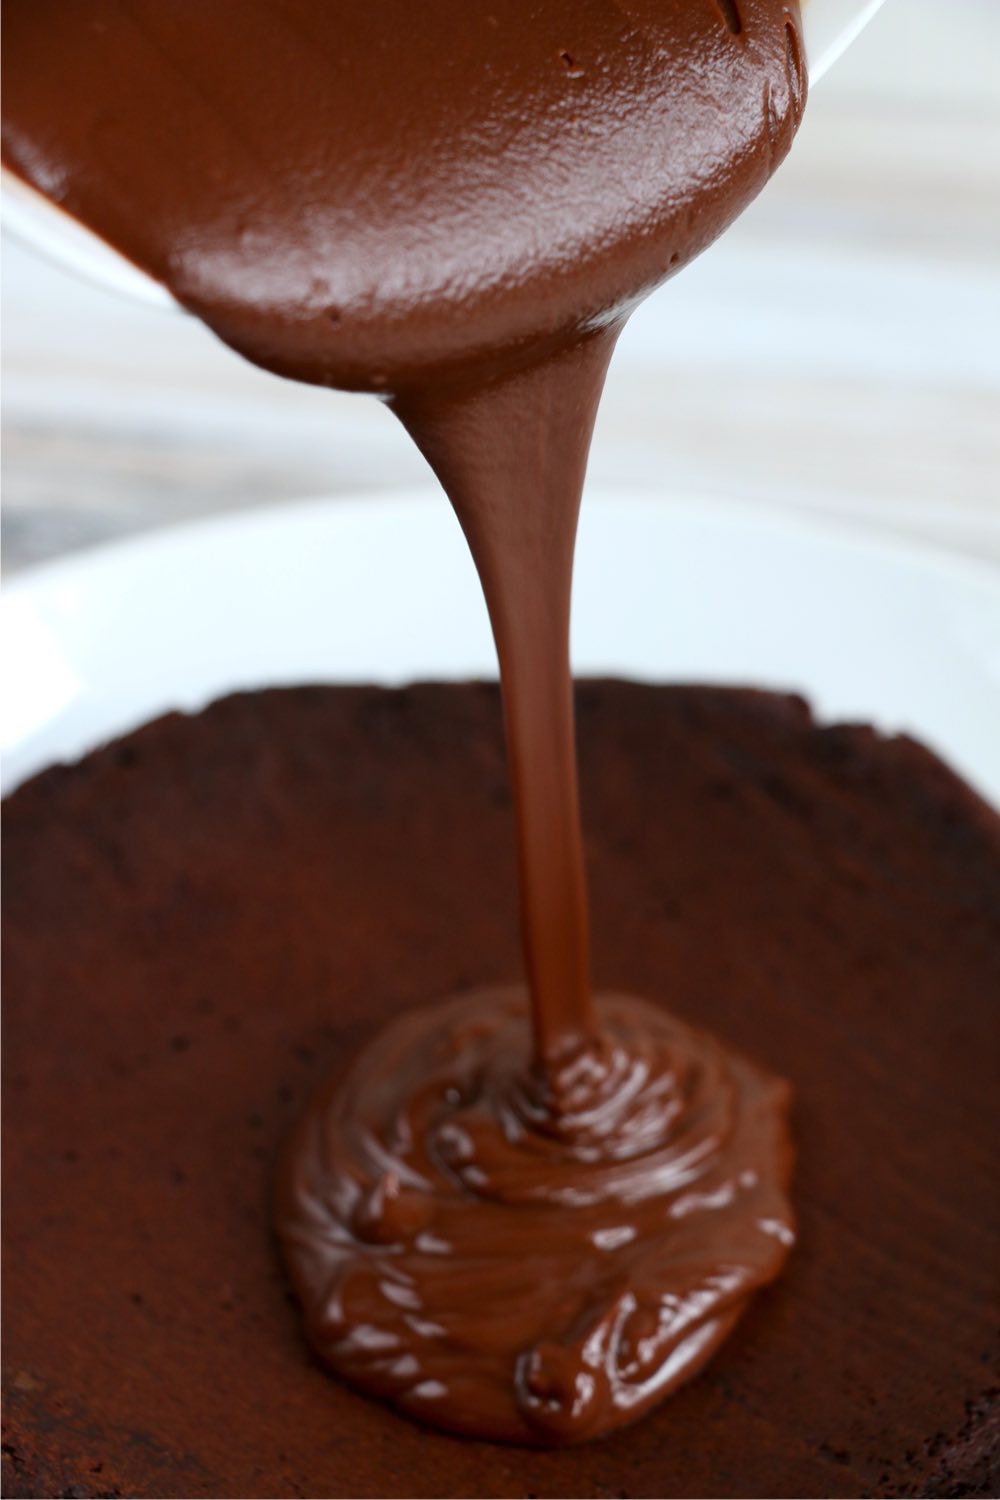 pouring ganache over chocolate cake